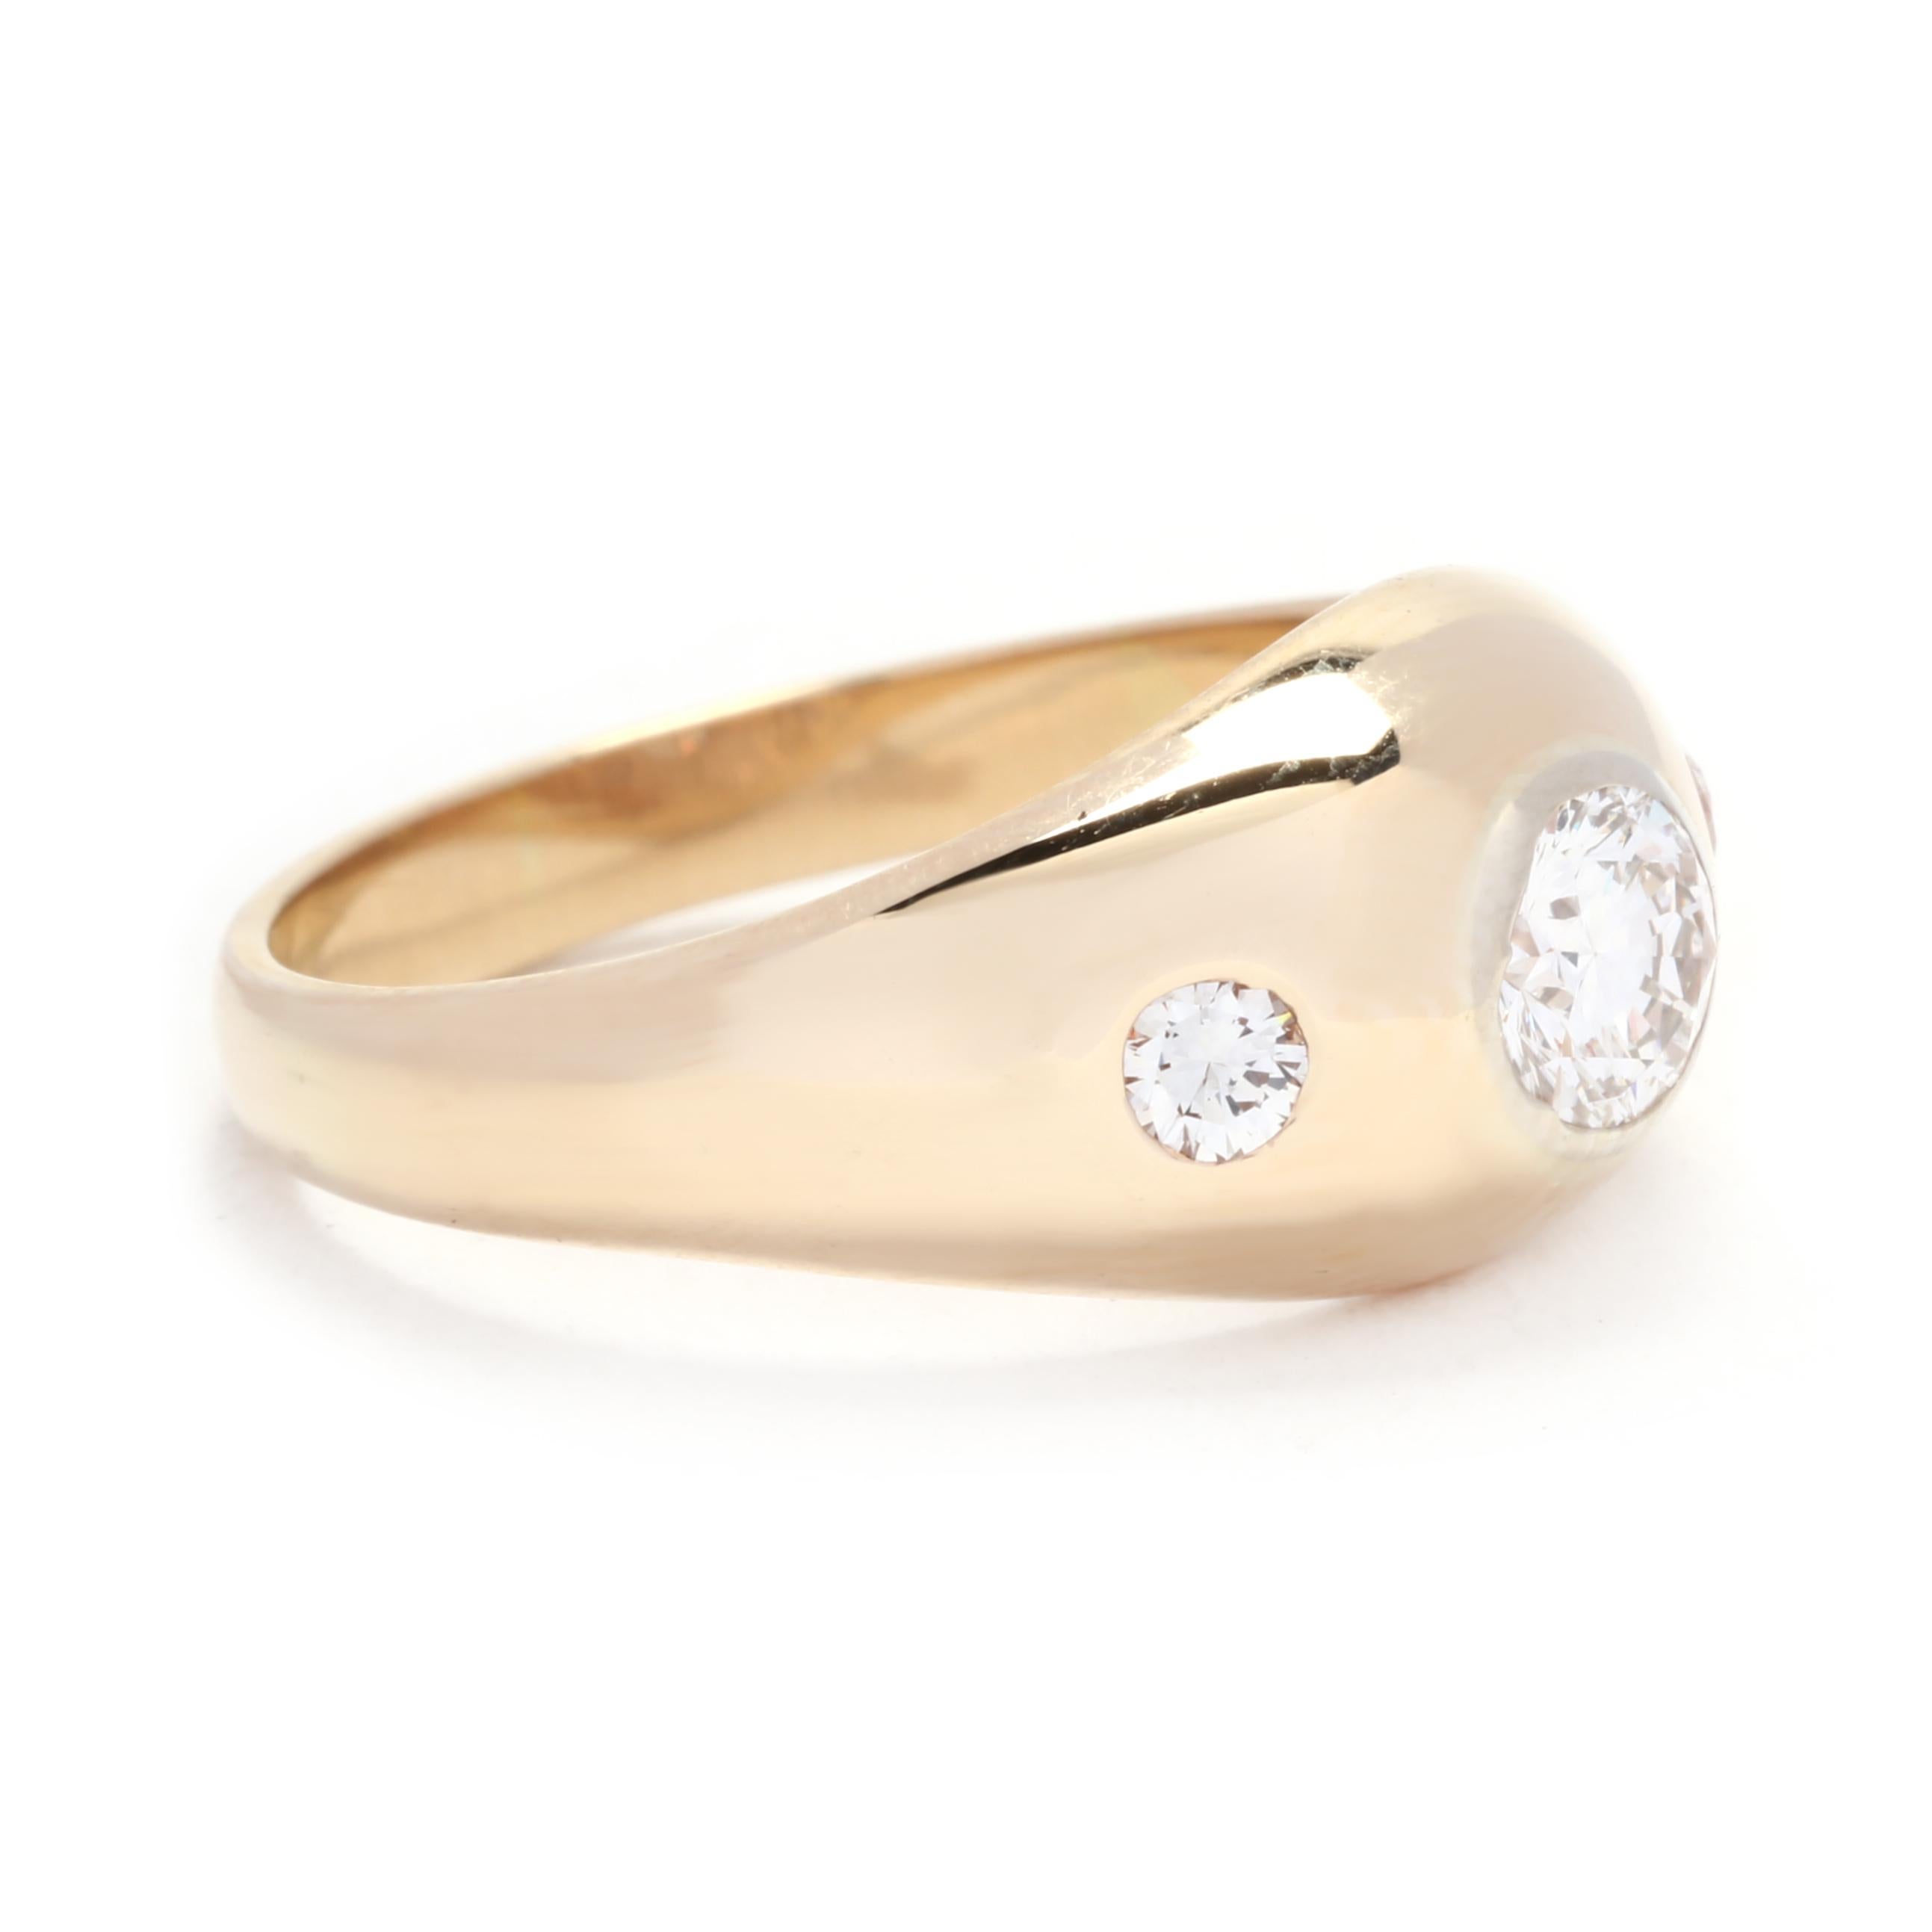 This stunning 3 diamond ring is a perfect choice for an engagement or anniversary ring. Crafted in 14K yellow gold, this ring features a flush set design with three sparkling diamonds totaling 0.70 carats in weight. The diamonds are of excellent